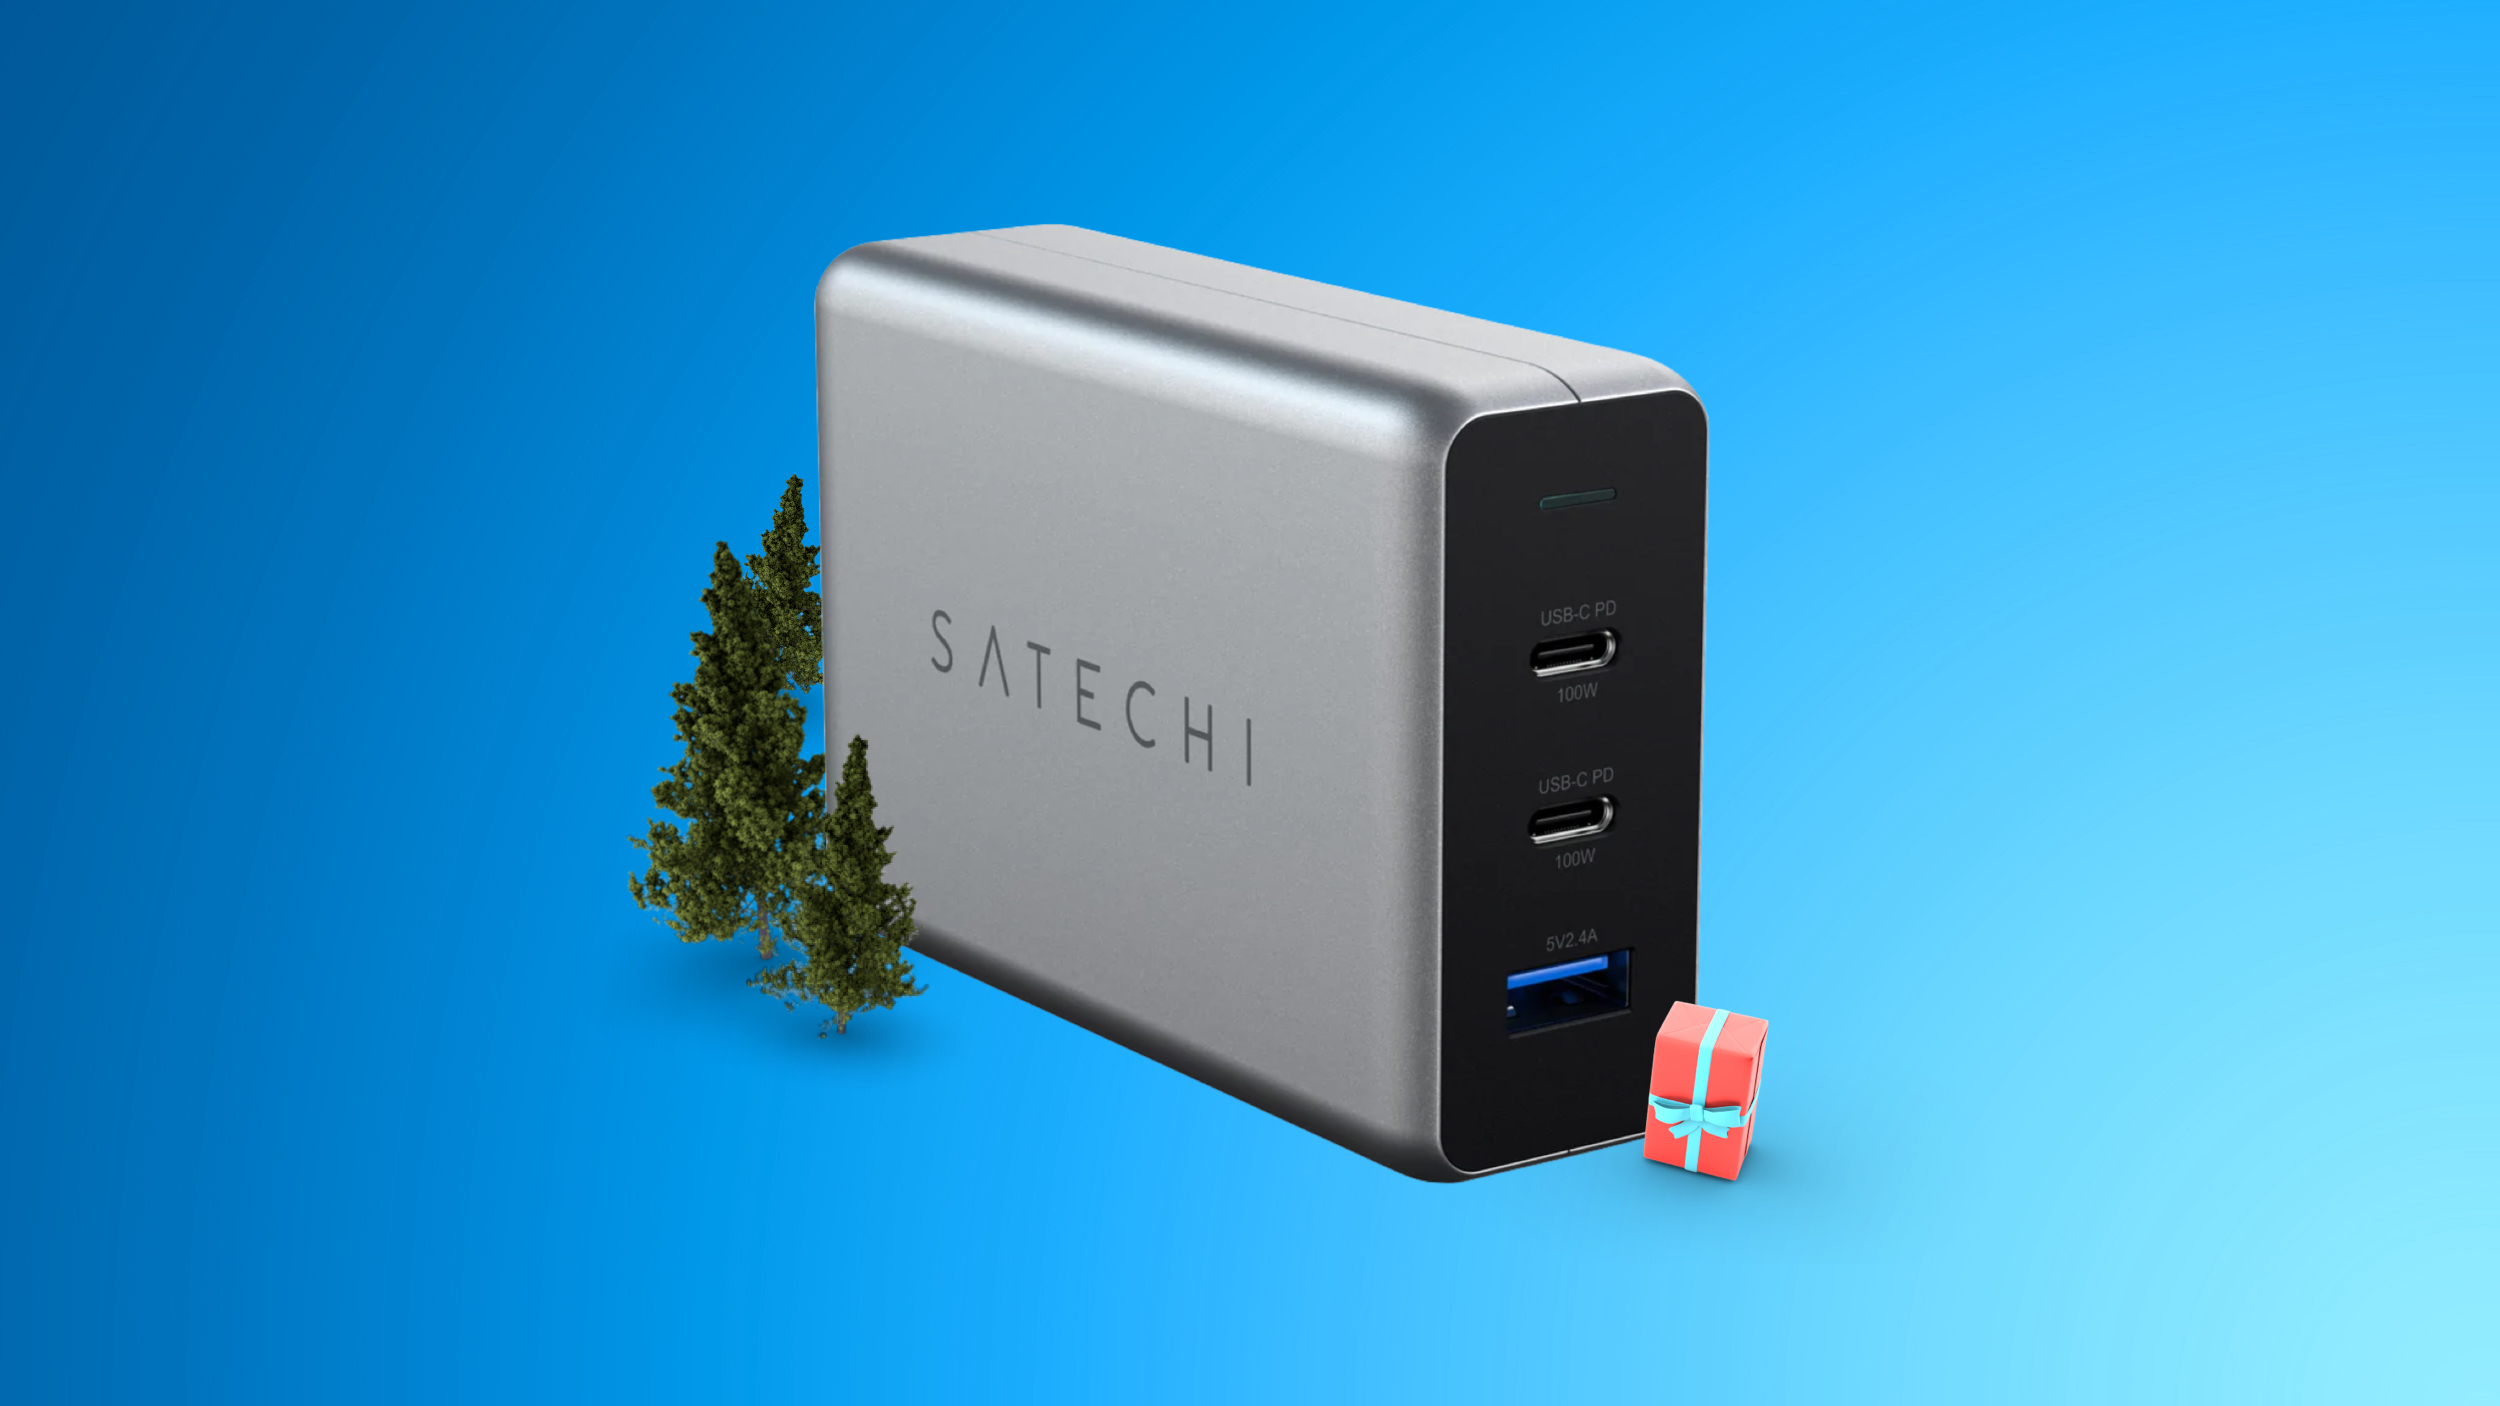 Early Black Friday Deals: Save Up to 60% on Apple Accessories From Twelve South, Satechi, and Mophie